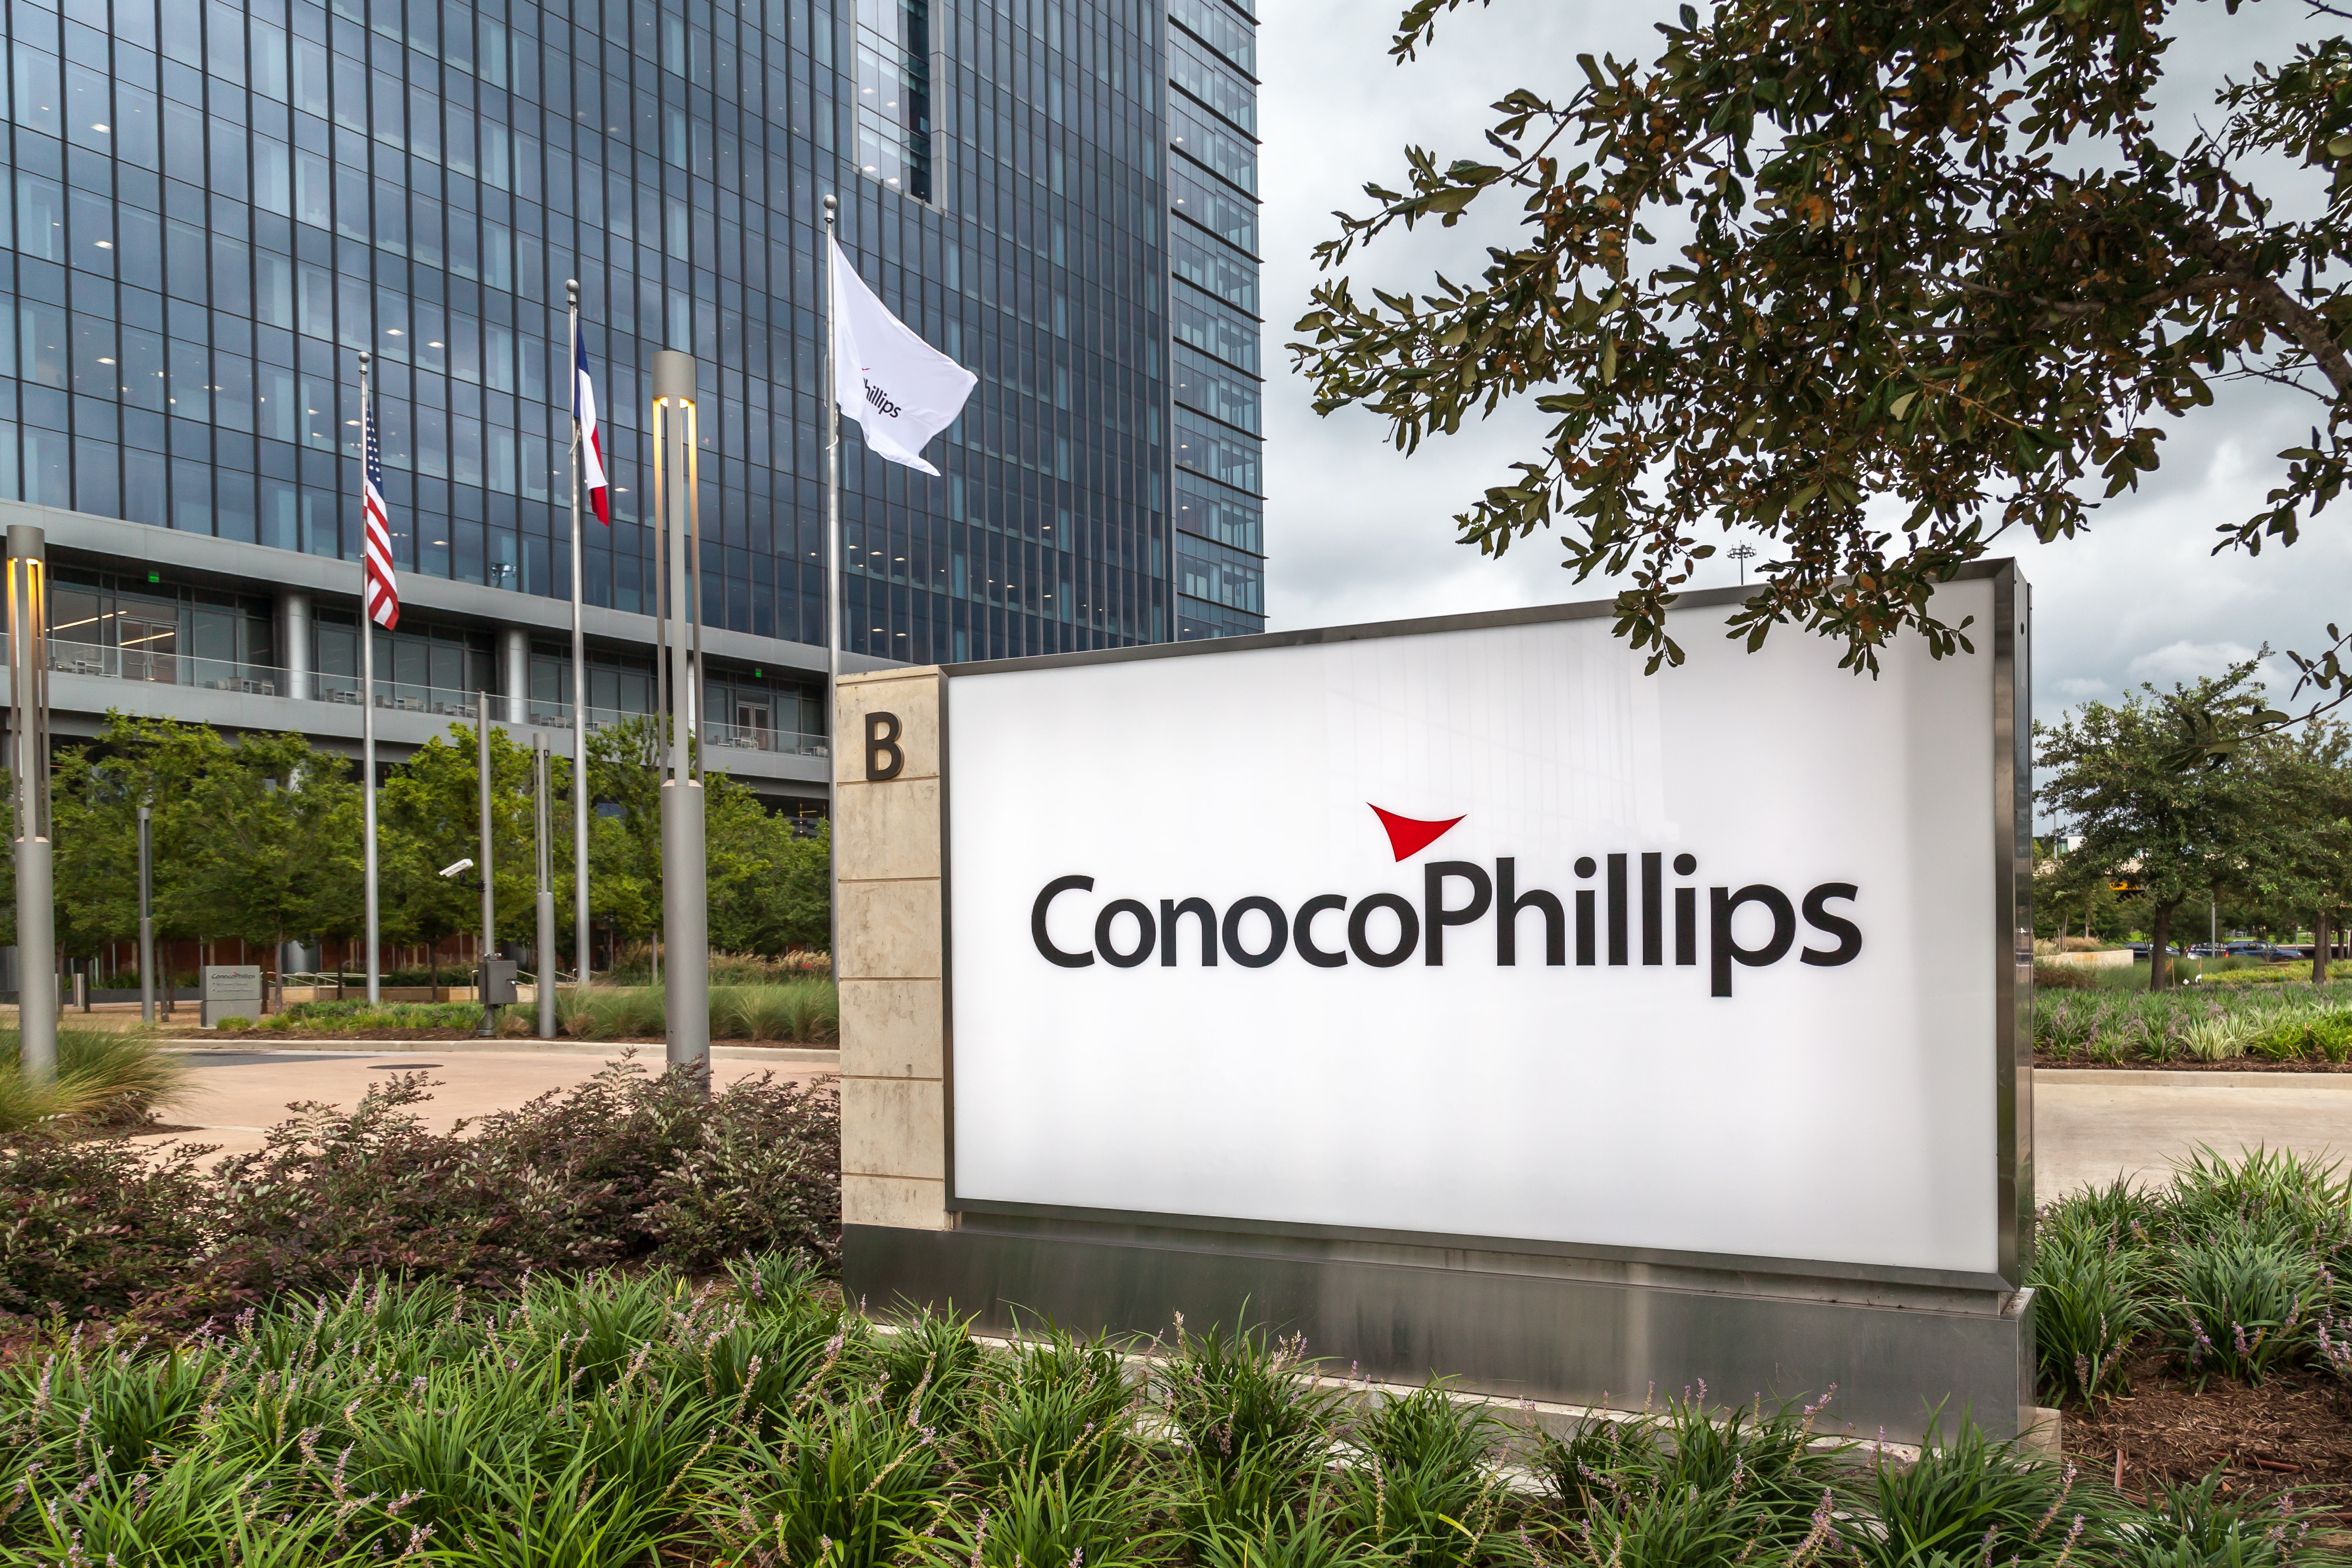 ConocoPhillips (COP) To Acquire Stake In Texas LNG Facility